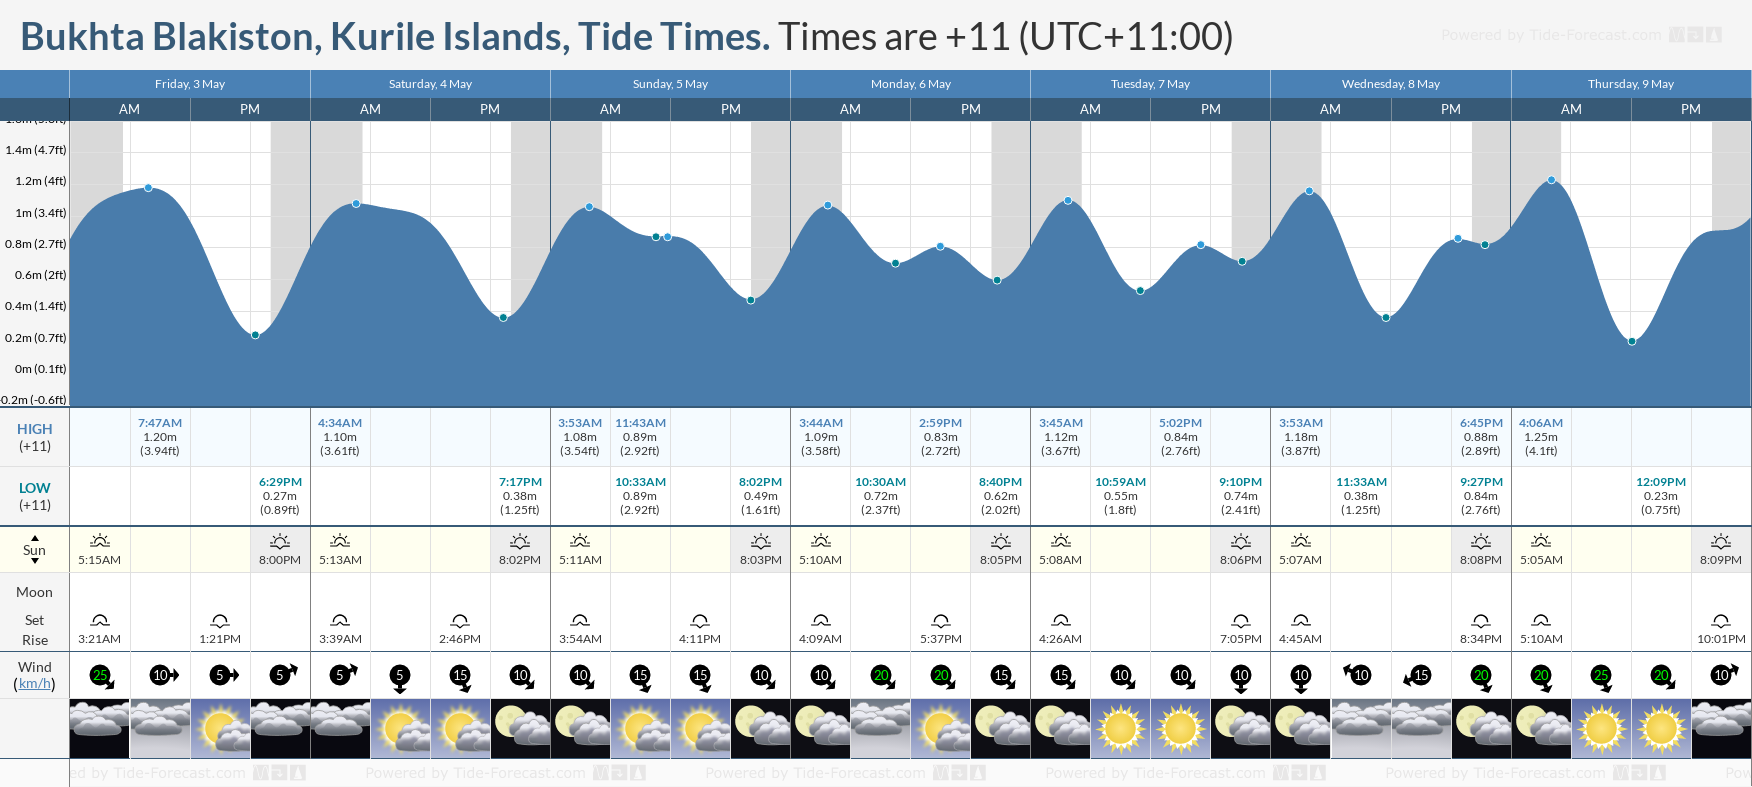 Bukhta Blakiston, Kurile Islands Tide Chart including high and low tide tide times for the next 7 days